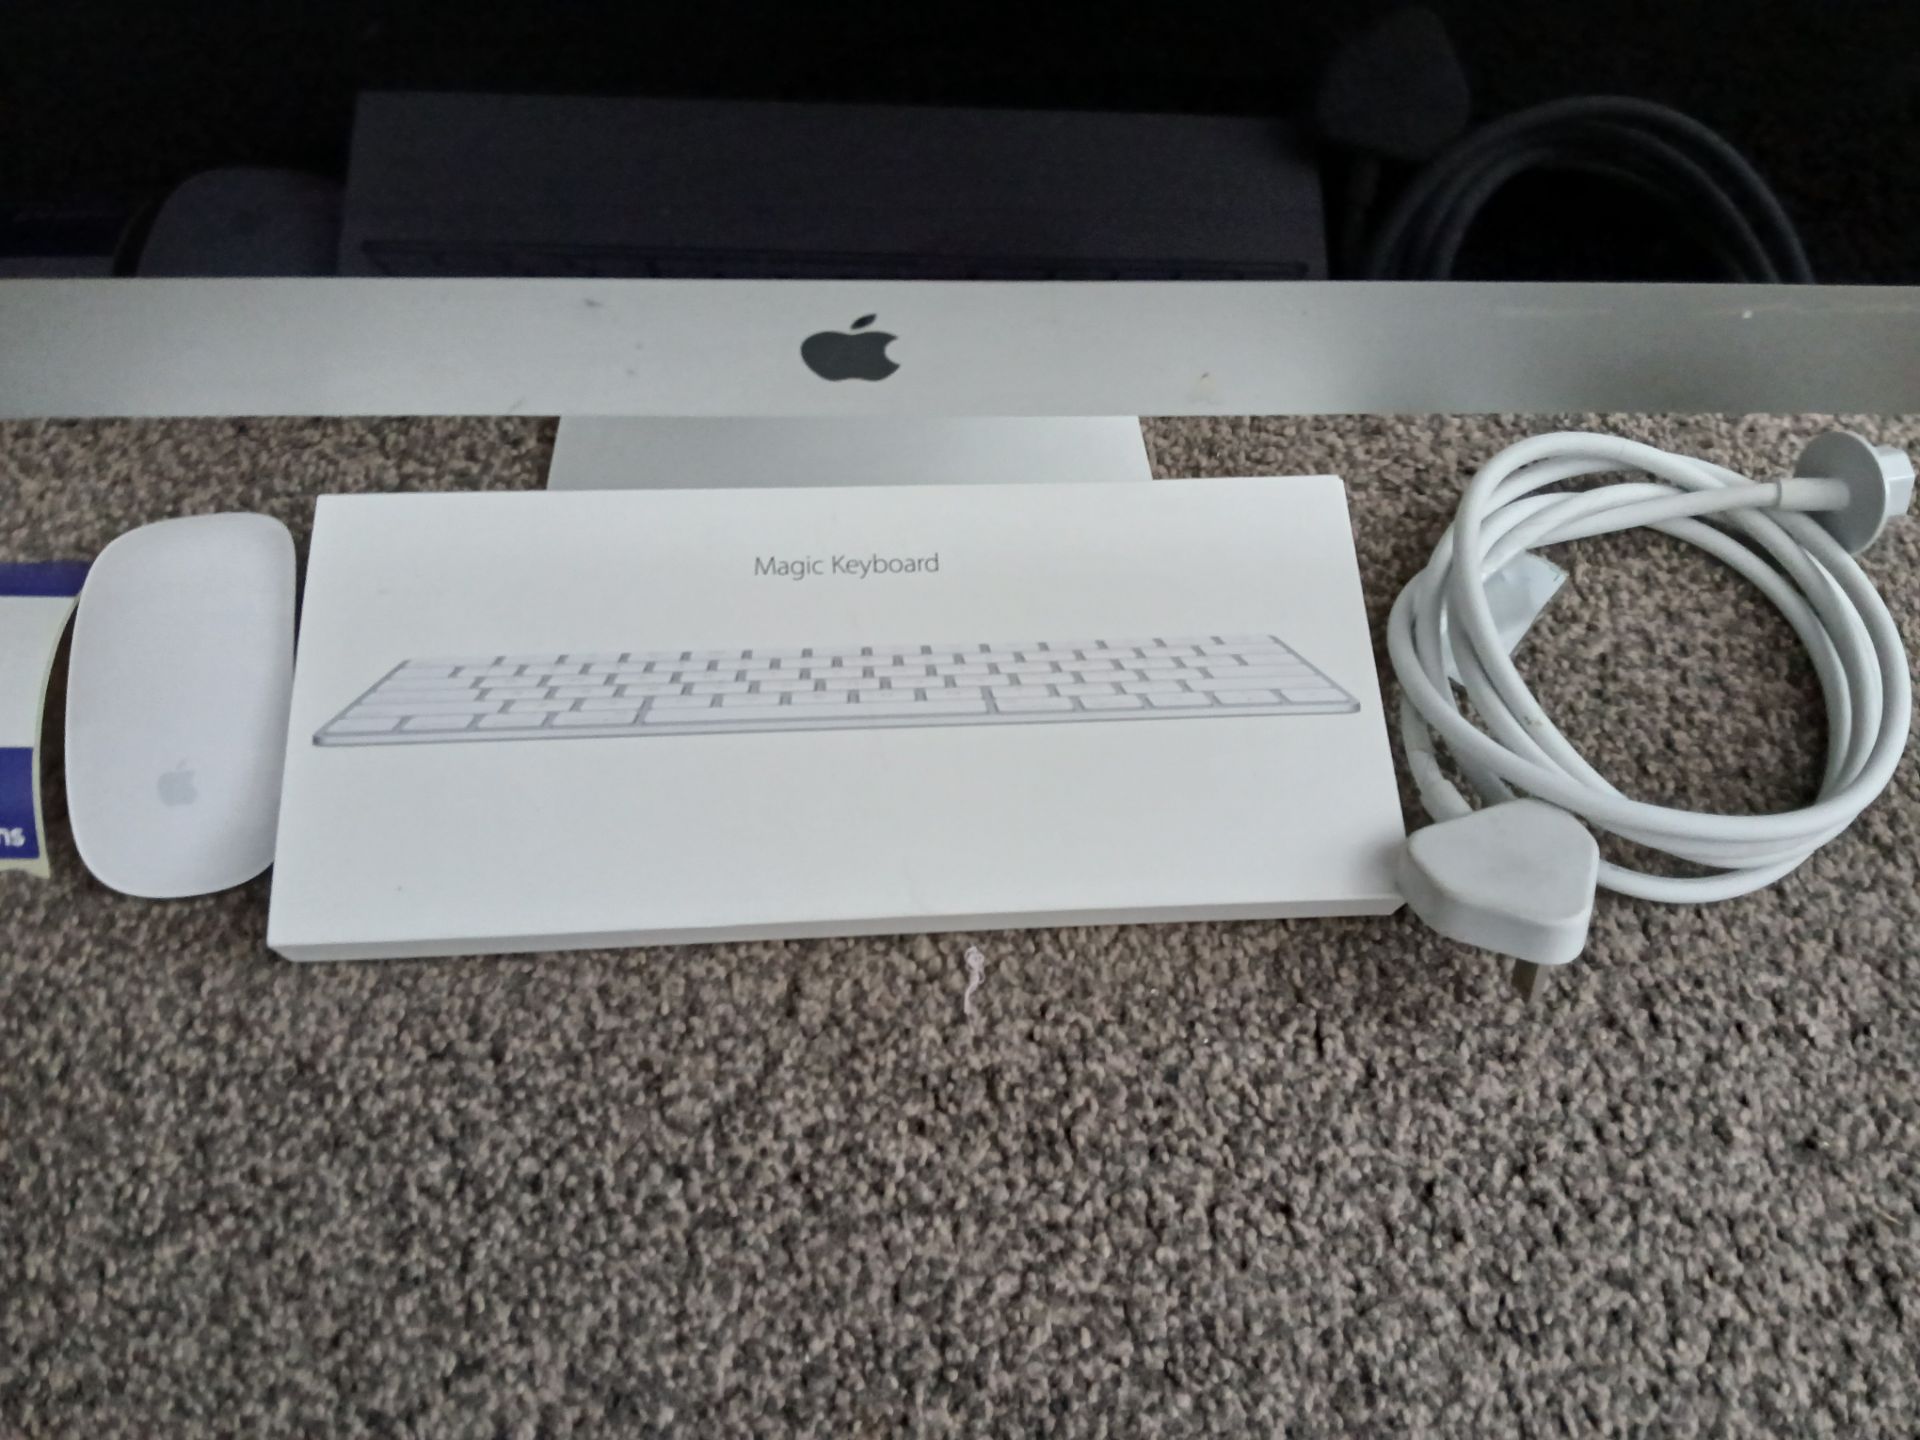 Apple iMac (Retina 5K, 27”, Late 2015) with Power Cable, Keyboard and Mouse, Serial Number - Bild 2 aus 3